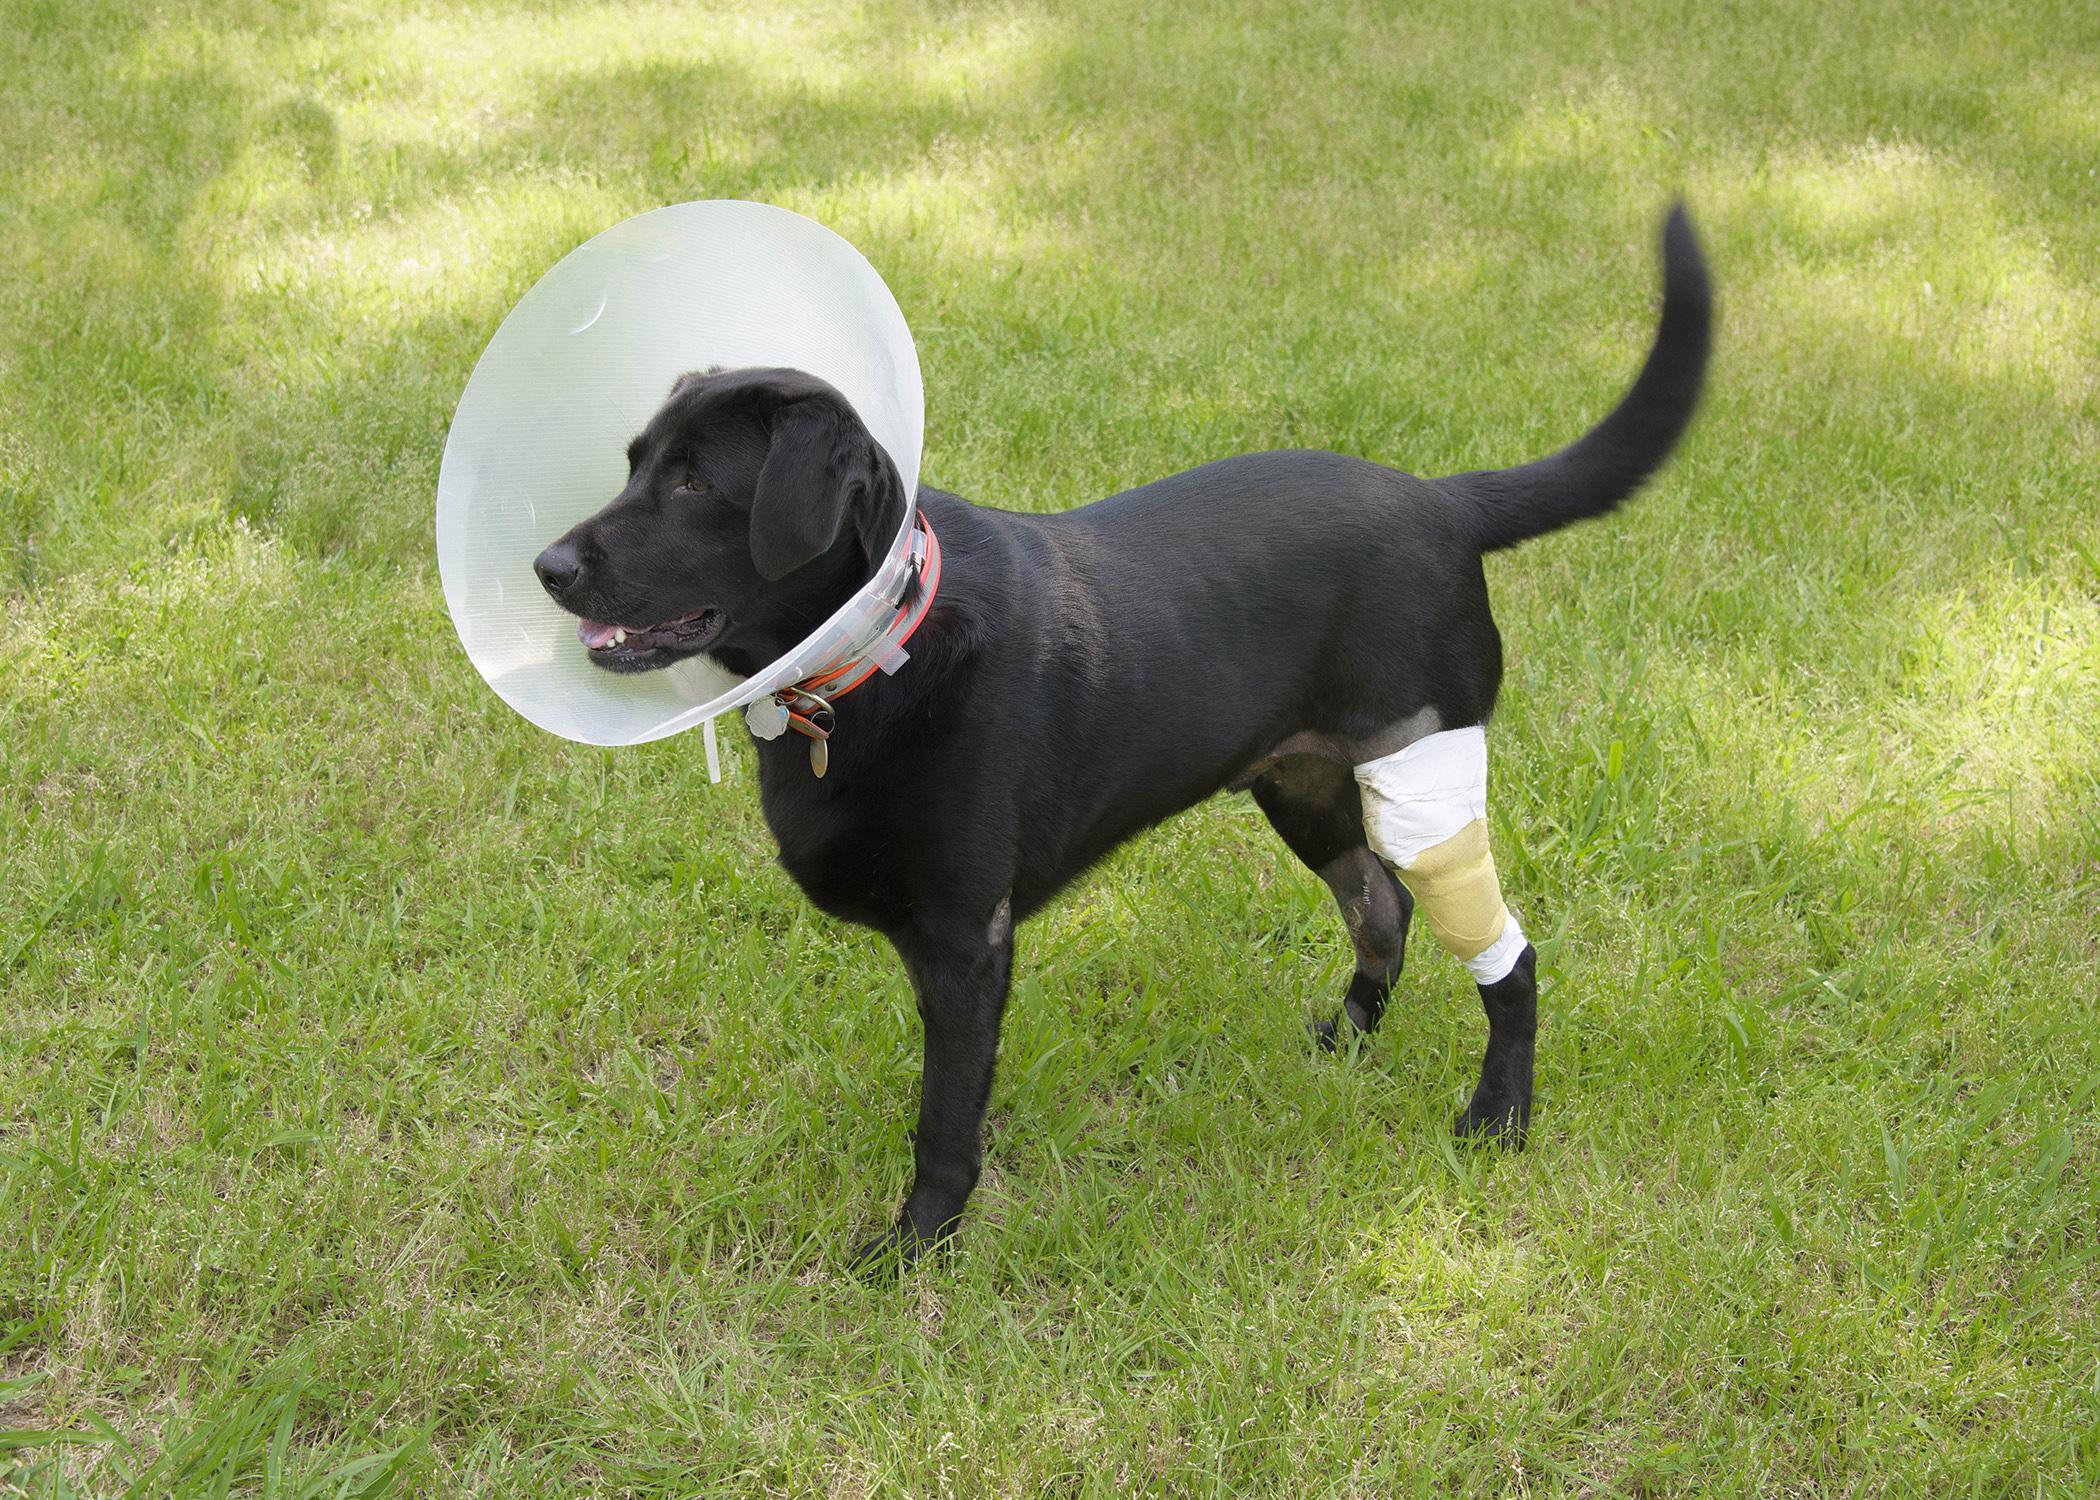 Siba, a 2-year-old lab mix, suffered cuts and abrasions when he was hit by a car in his own driveway. He was photographed in recovery May 6, 2015, in Starkville, Mississippi. (Photo by MSU Ag Communications/Kevin Hudson)